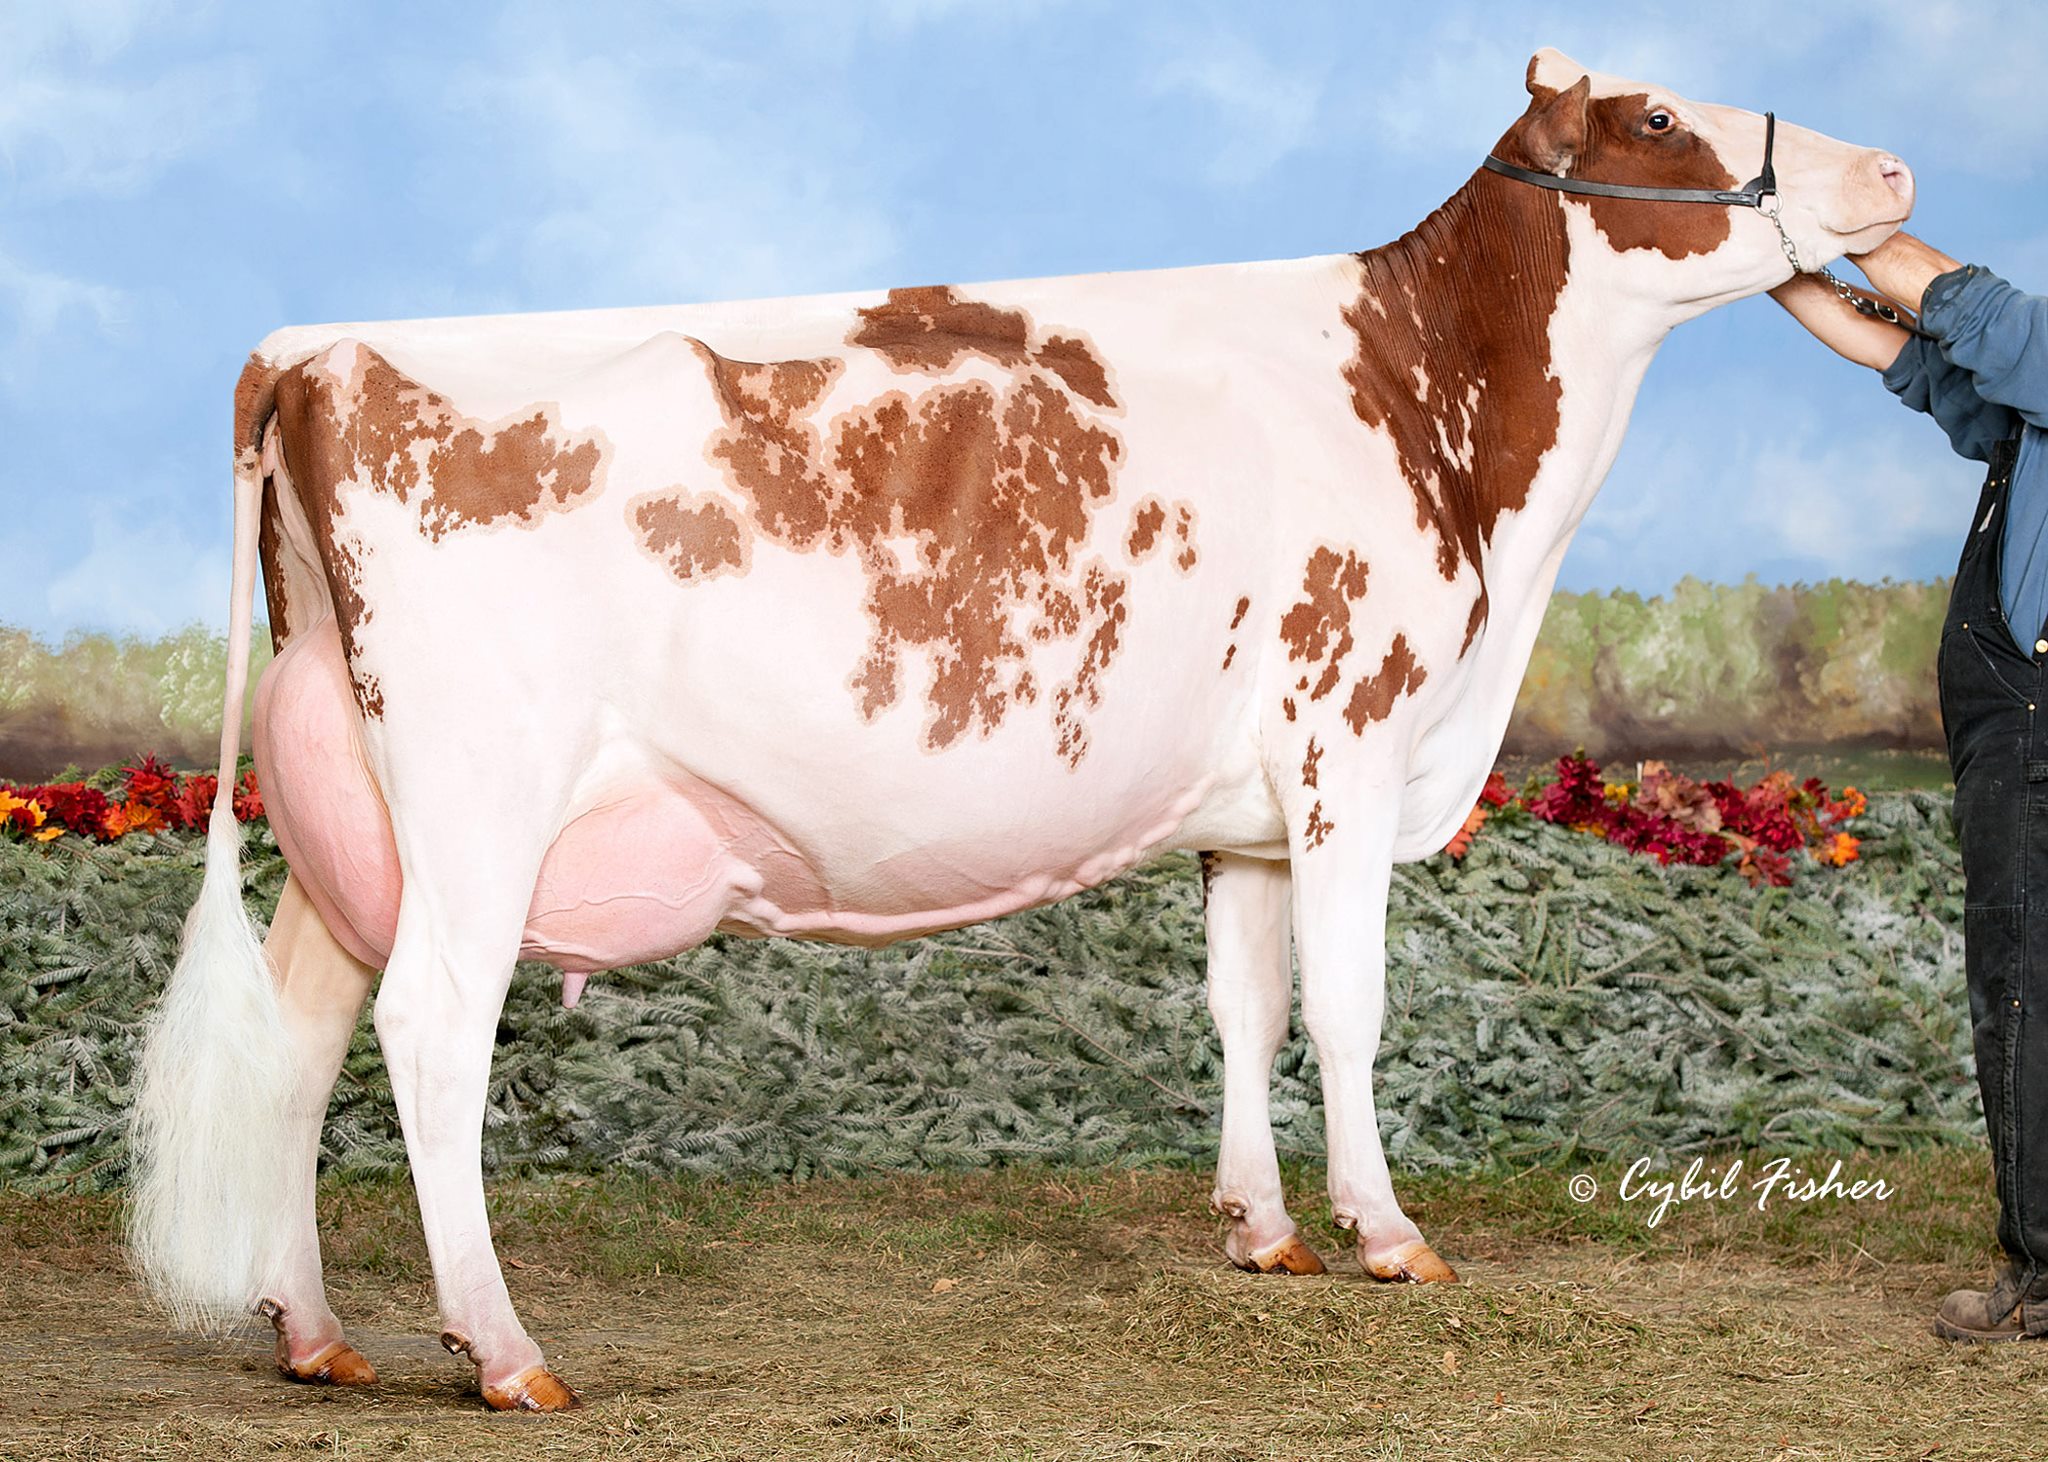 Redman Rally-Red  now EX-91 2E @ 7-01 (Nominated All-American R&W Aged Cow 2012)